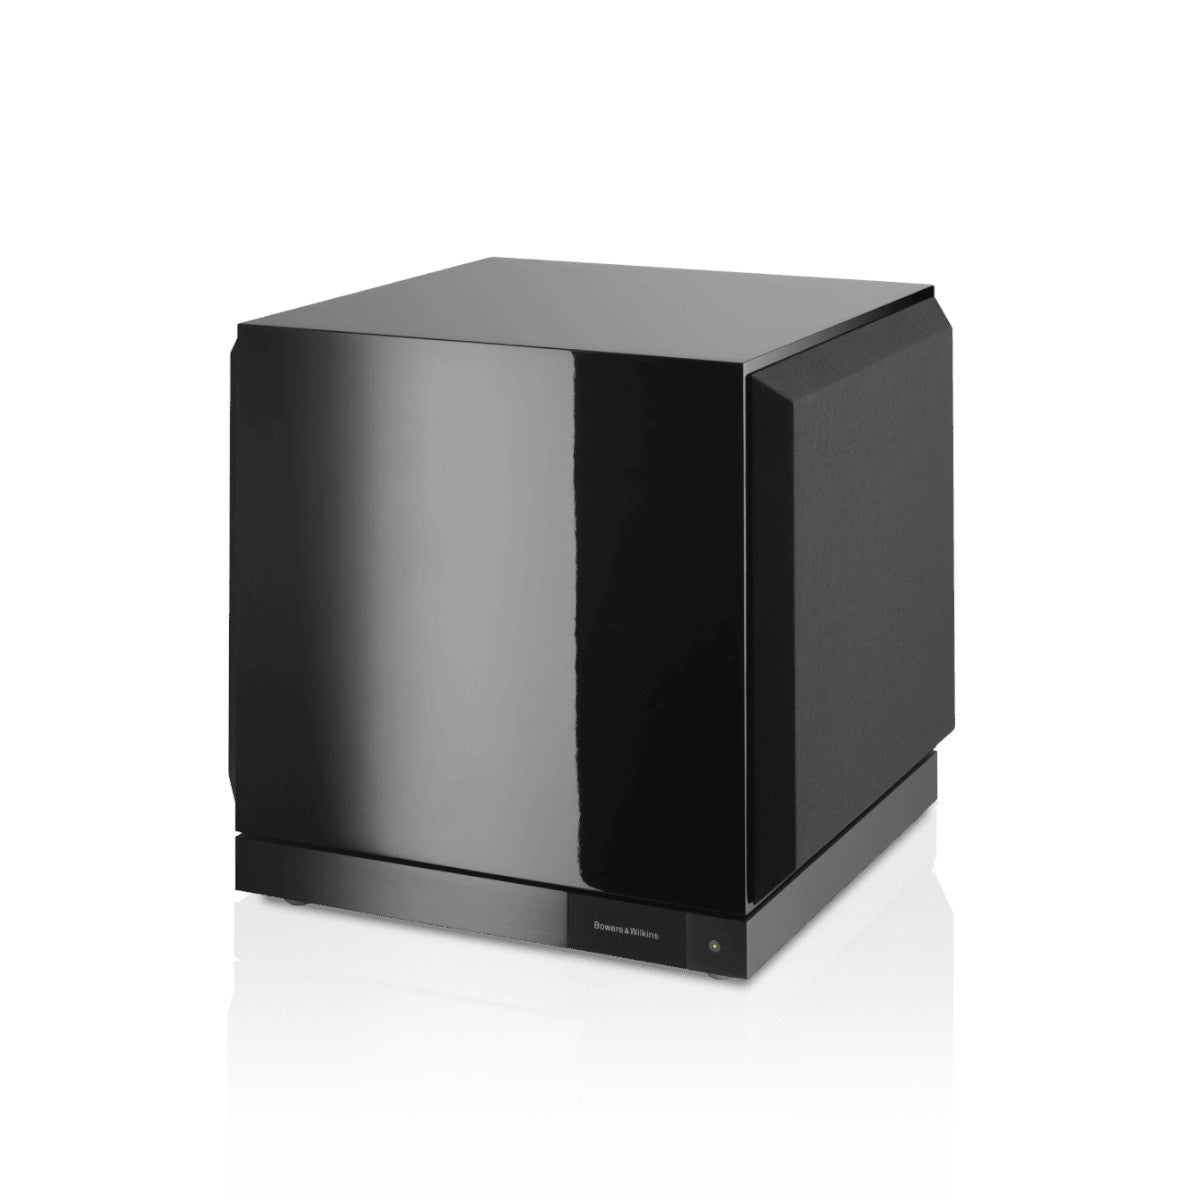 Bowers & Wilkins (B&W) DB3D Compact Powered Subwoofer - Ooberpad India